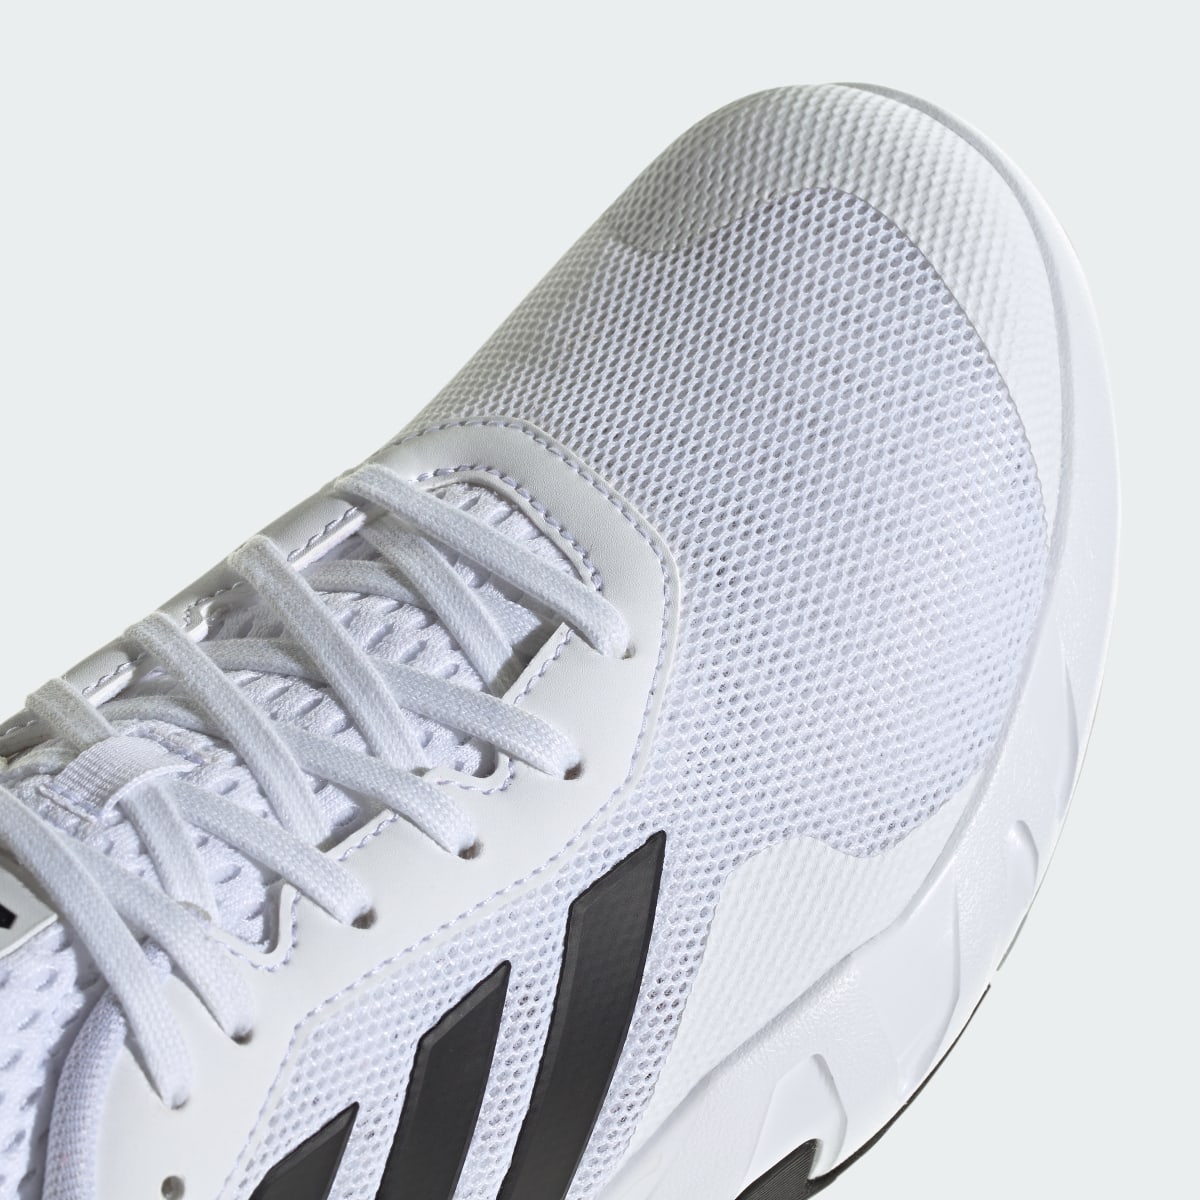 Adidas Amplimove Trainer Shoes. 9